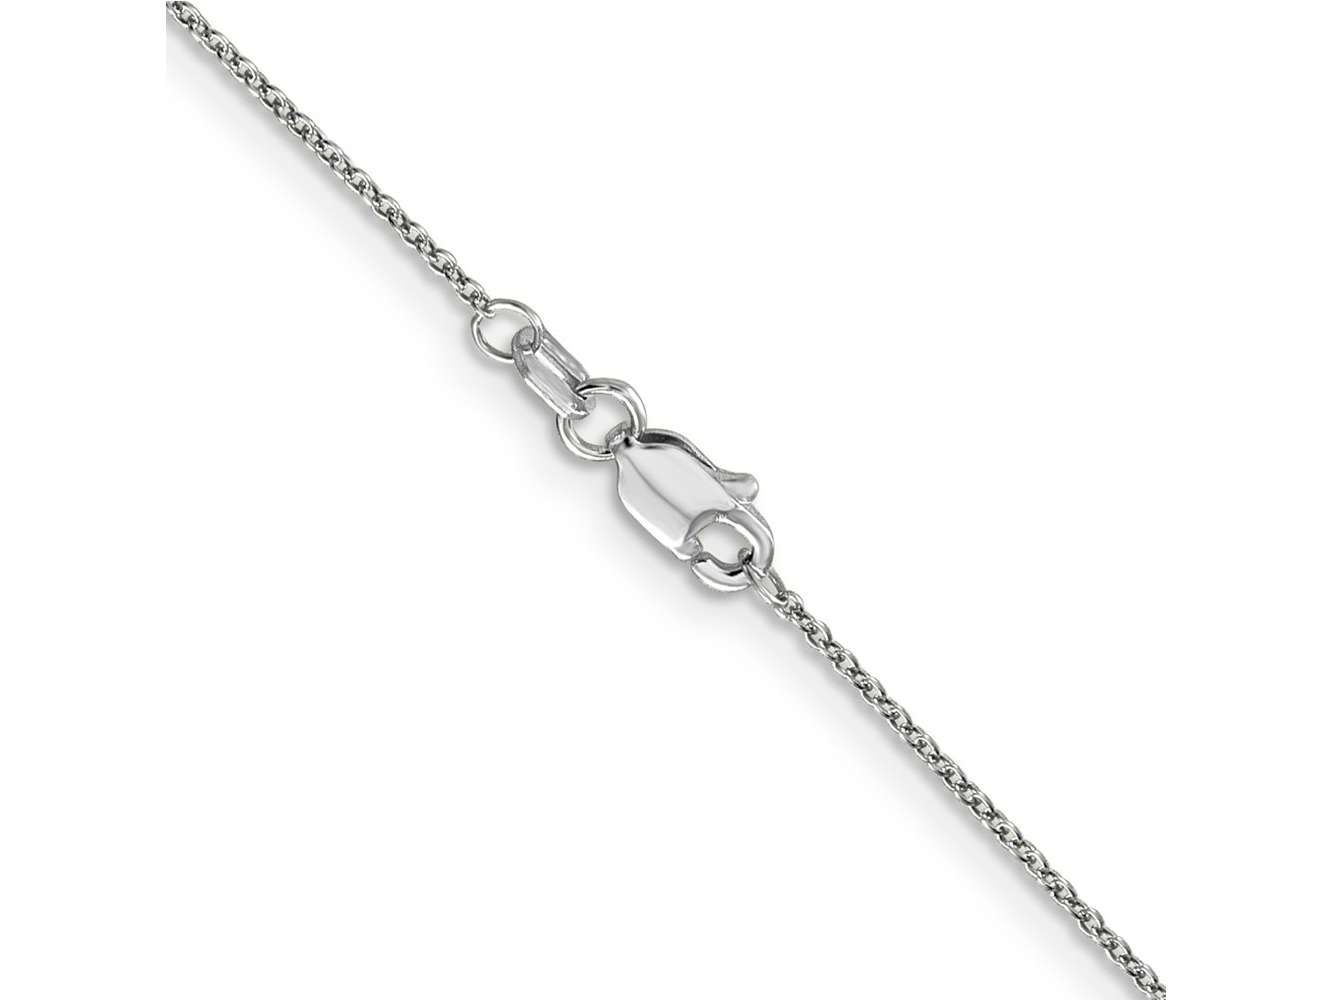 FJC Finejewelers 14 kt White Gold Round Cable Chain 18 Inches x 0.9 mm